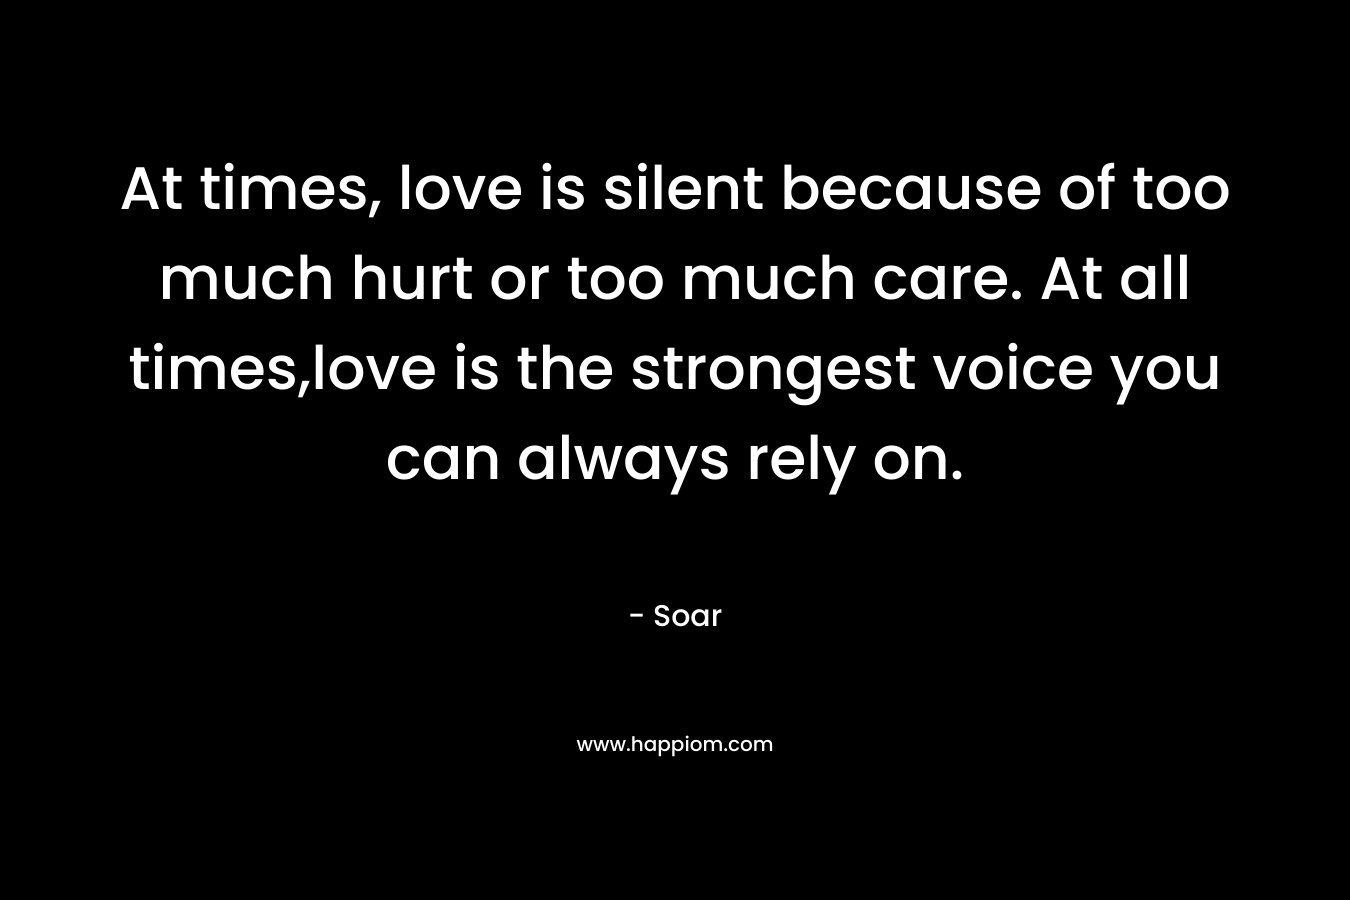 At times, love is silent because of too much hurt or too much care. At all times,love is the strongest voice you can always rely on. – Soar